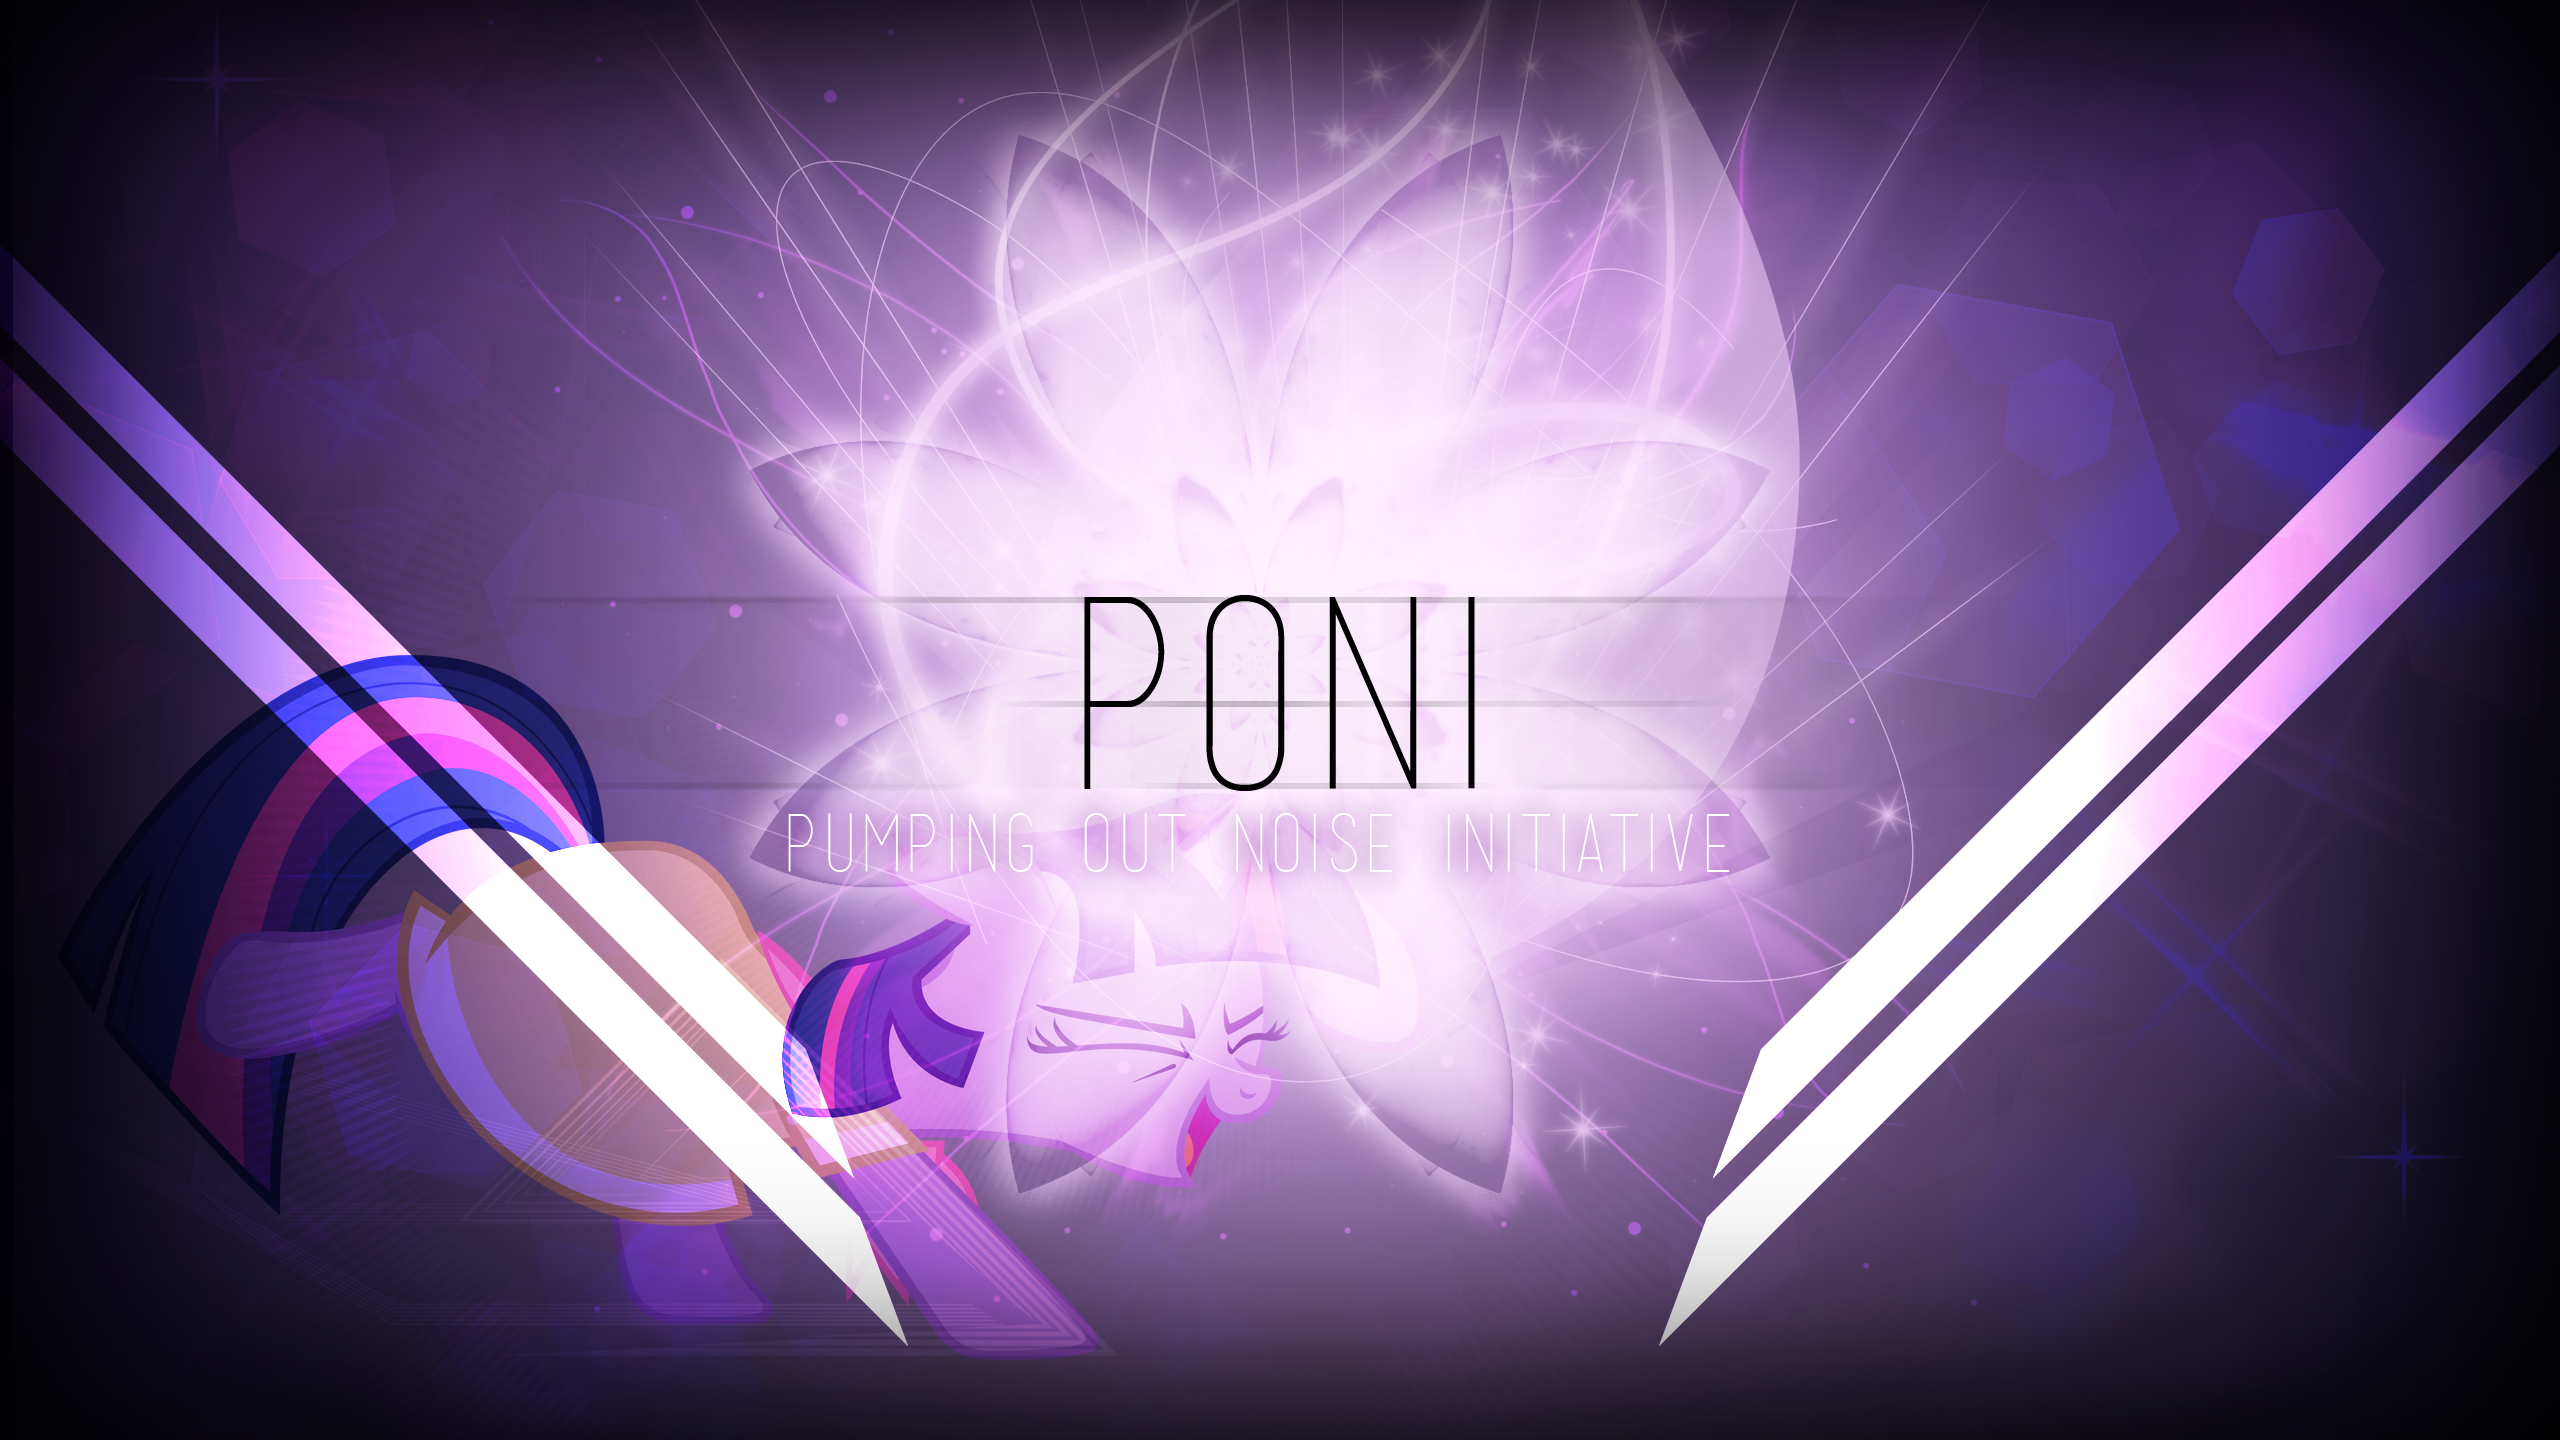 PONI by Digitallee and Ptepix